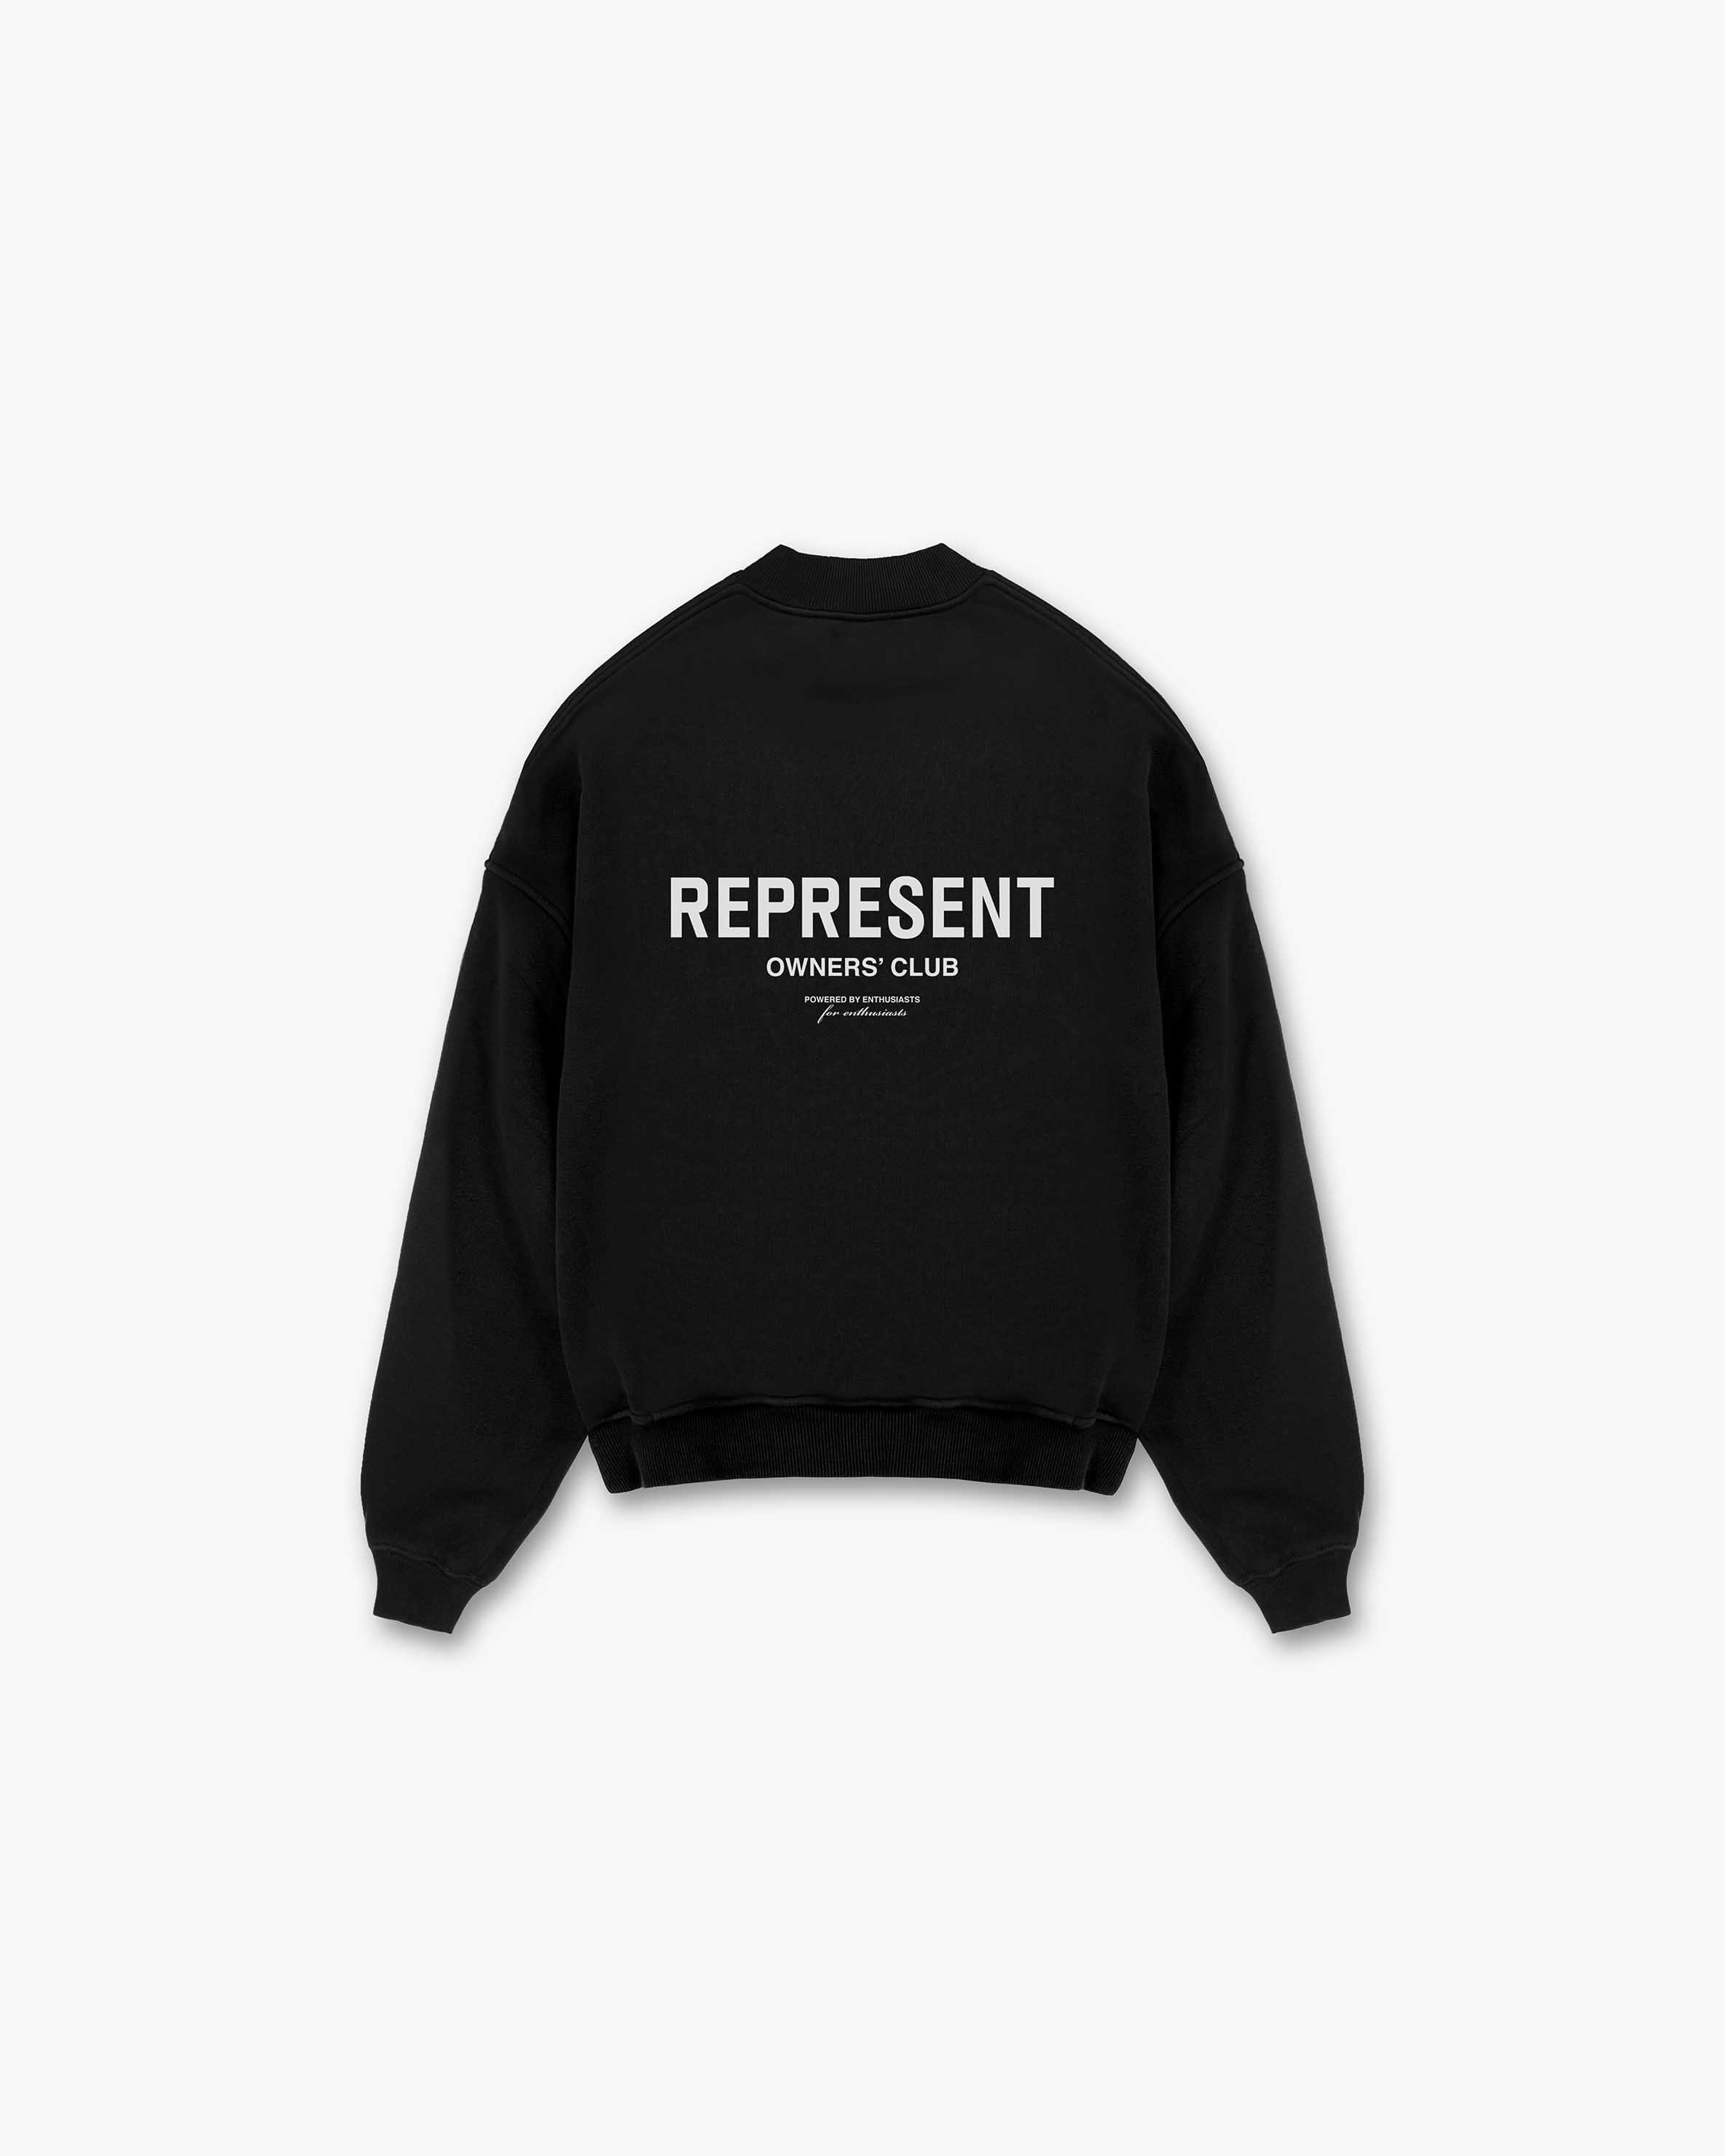 Represent Owners Club Sweater | Black Sweaters | REPRESENT CLO